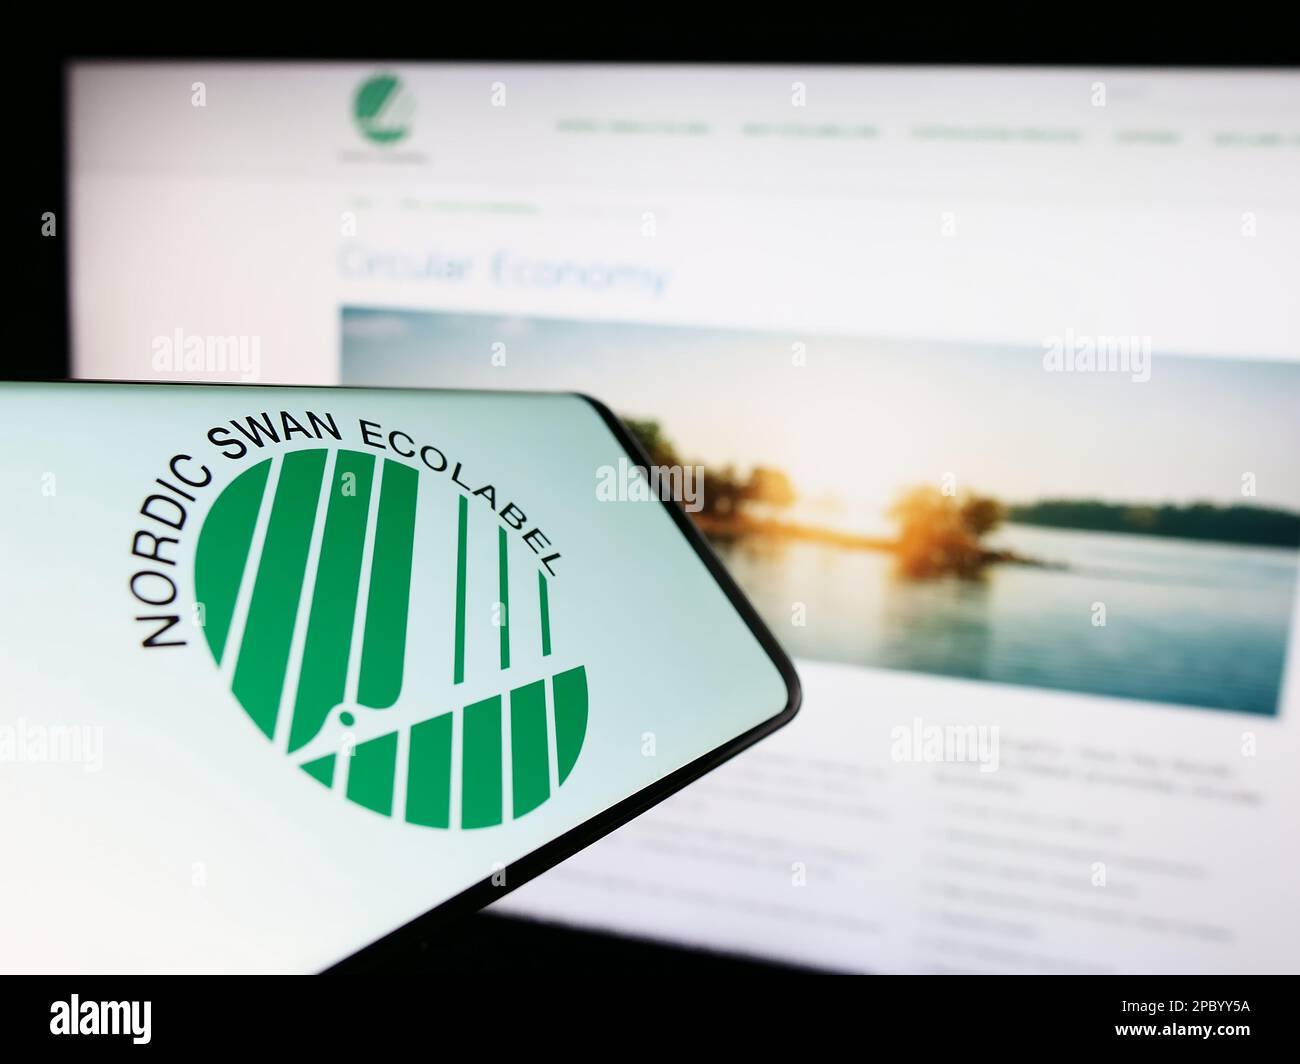 Mobile phone with logo of environmental certification Nordic Ecolabel on screen in front of website. Focus on center-right of phone display. Stock Photo